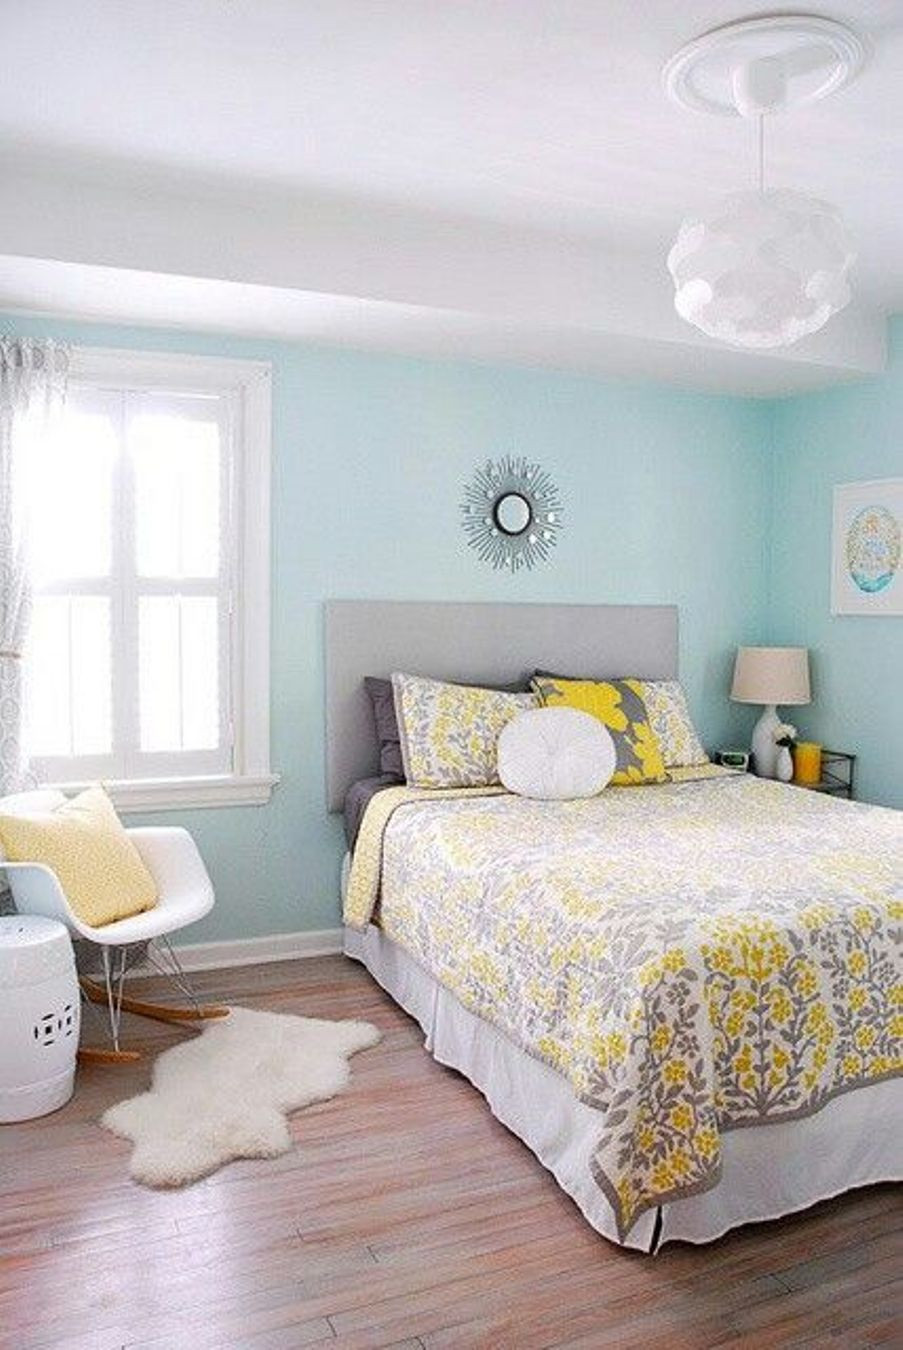 Popular Bedroom Colors
 Best Paint Colors for Small Room – Some Tips – HomesFeed